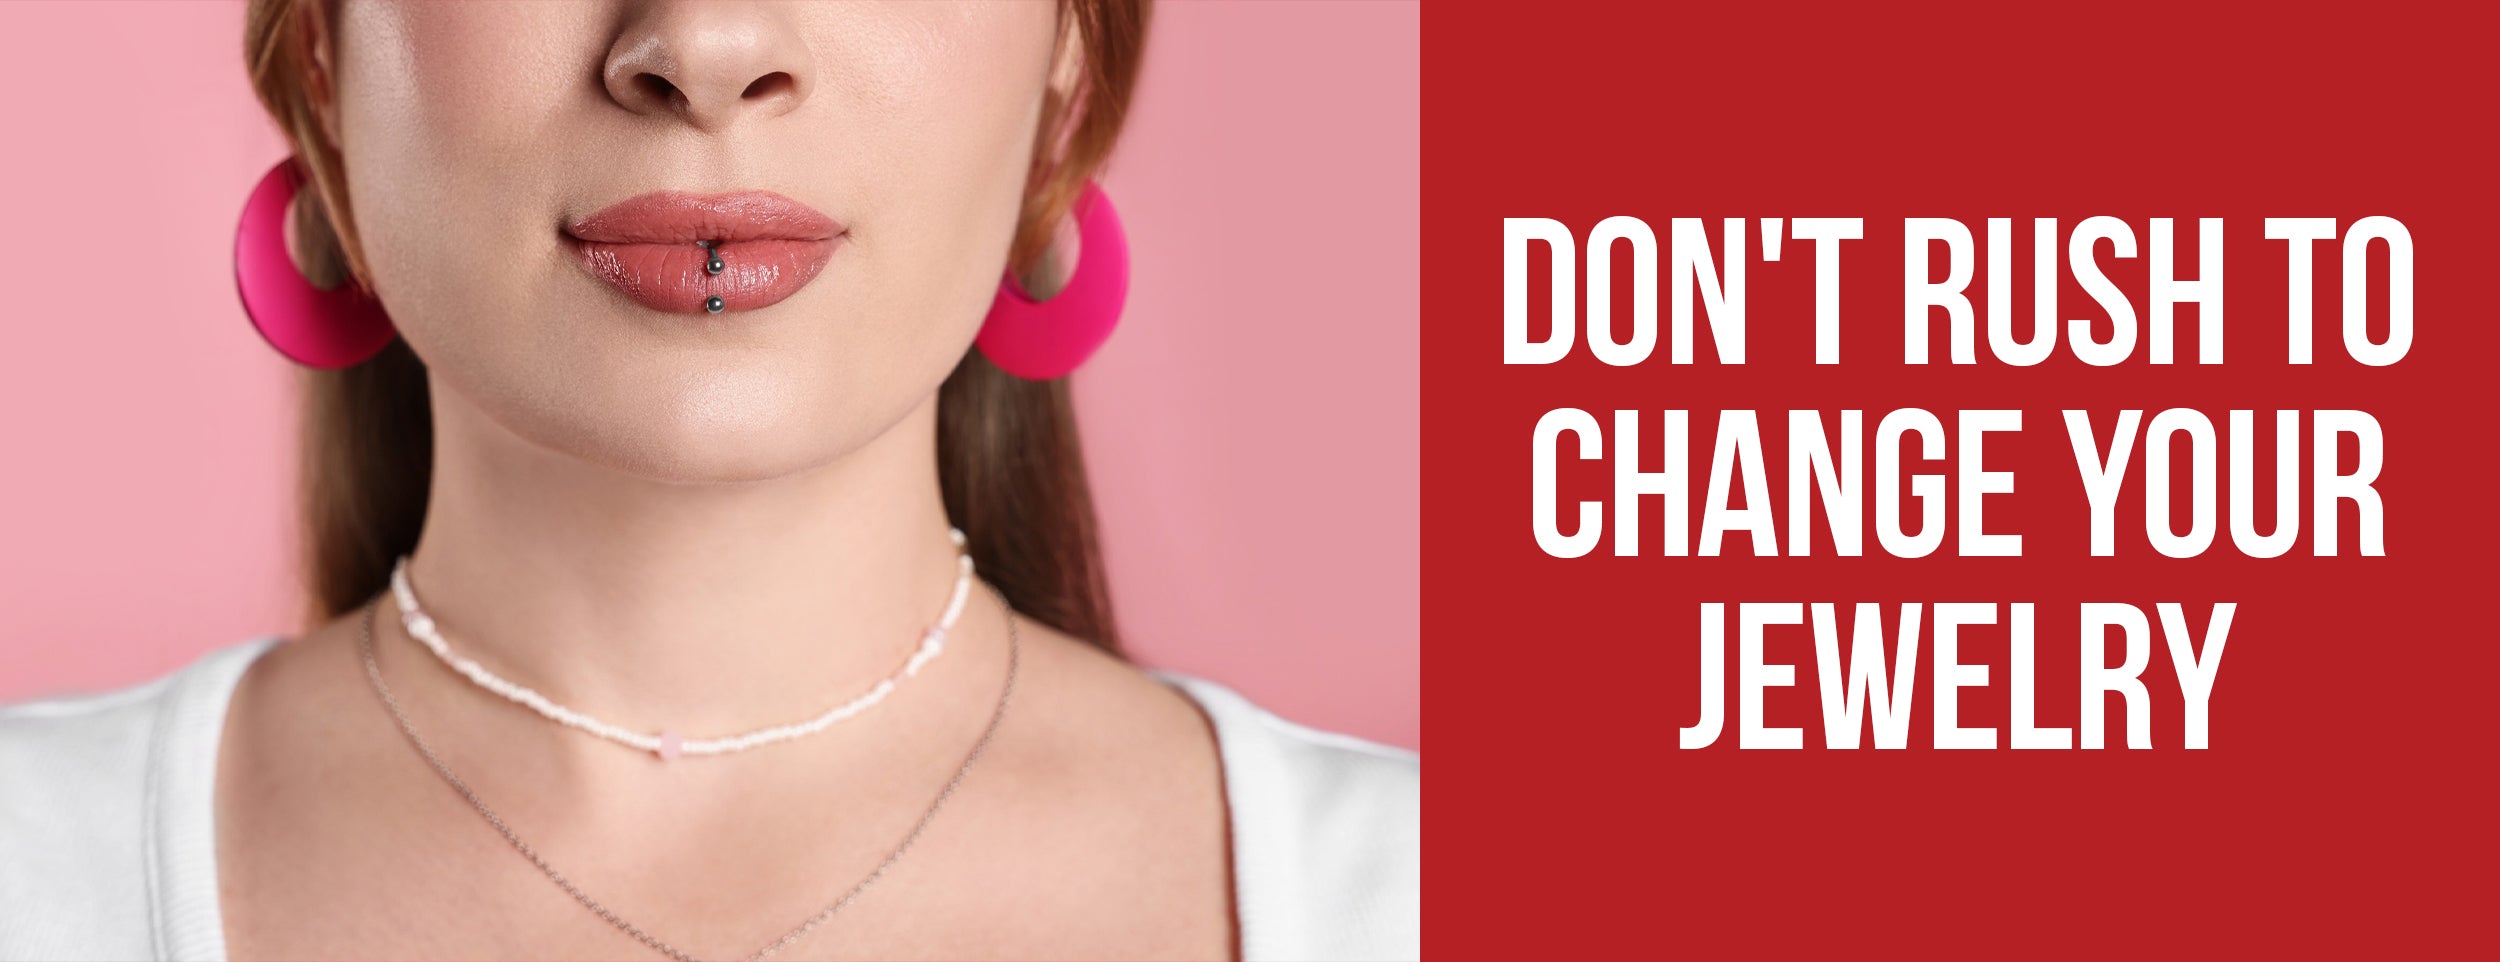 Don't Rush to Change Your Jewelry